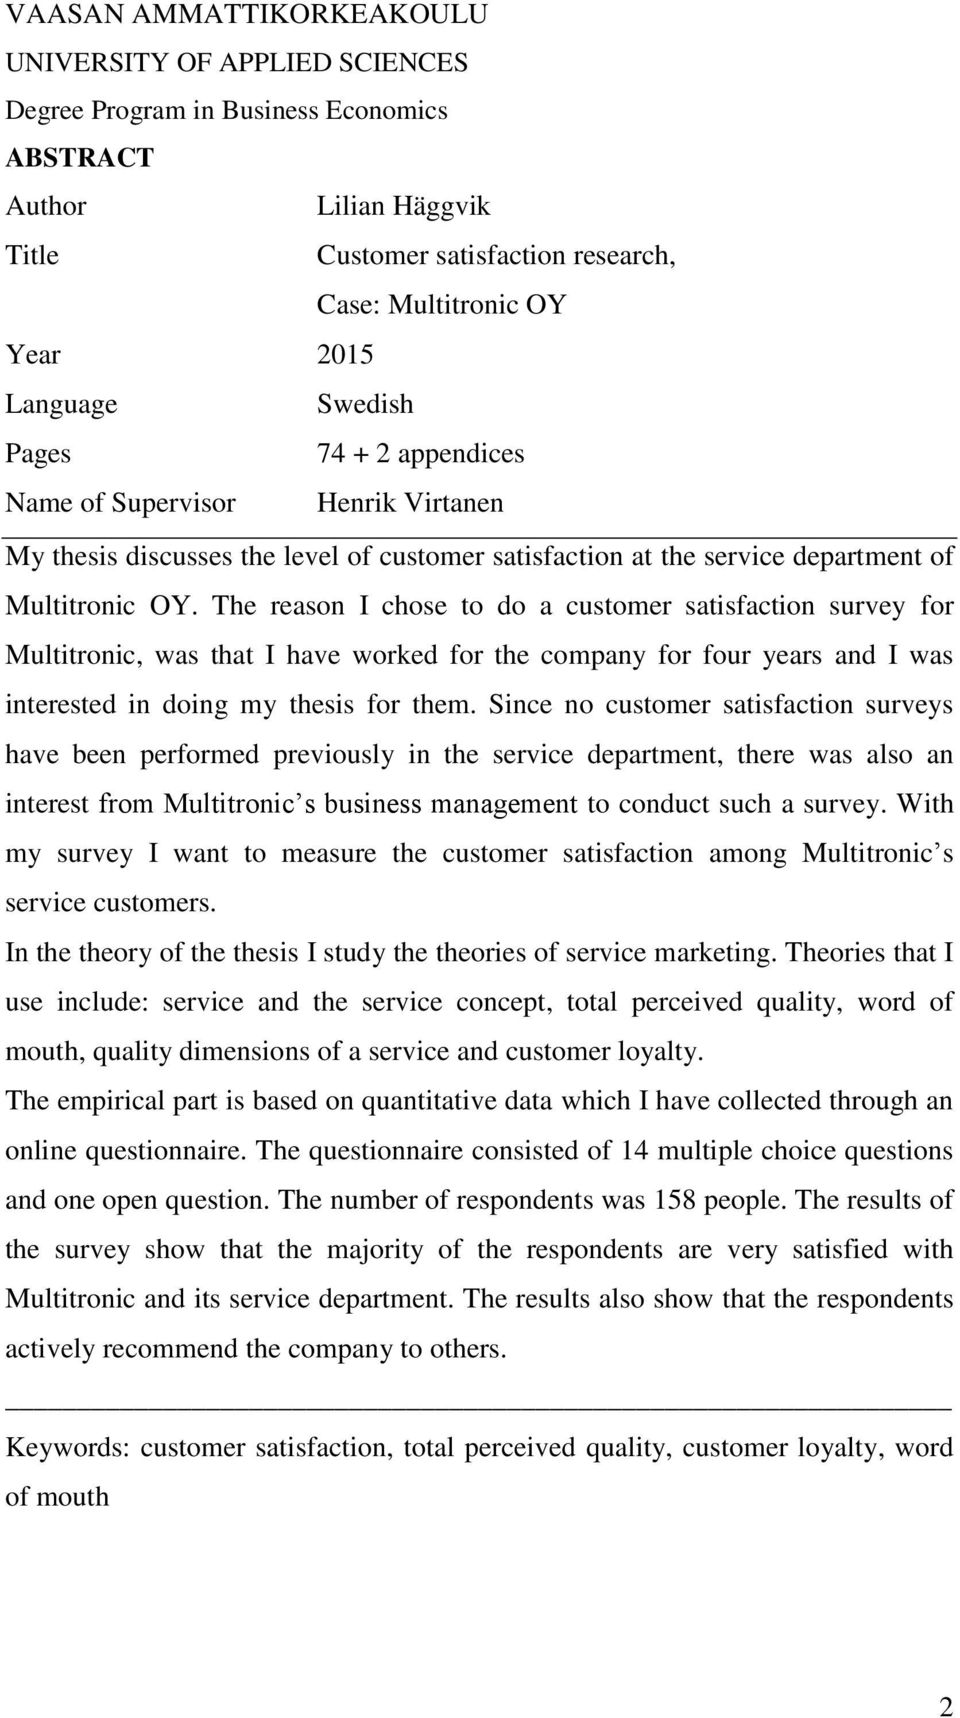 The reason I chose to do a customer satisfaction survey for Multitronic, was that I have worked for the company for four years and I was interested in doing my thesis for them.